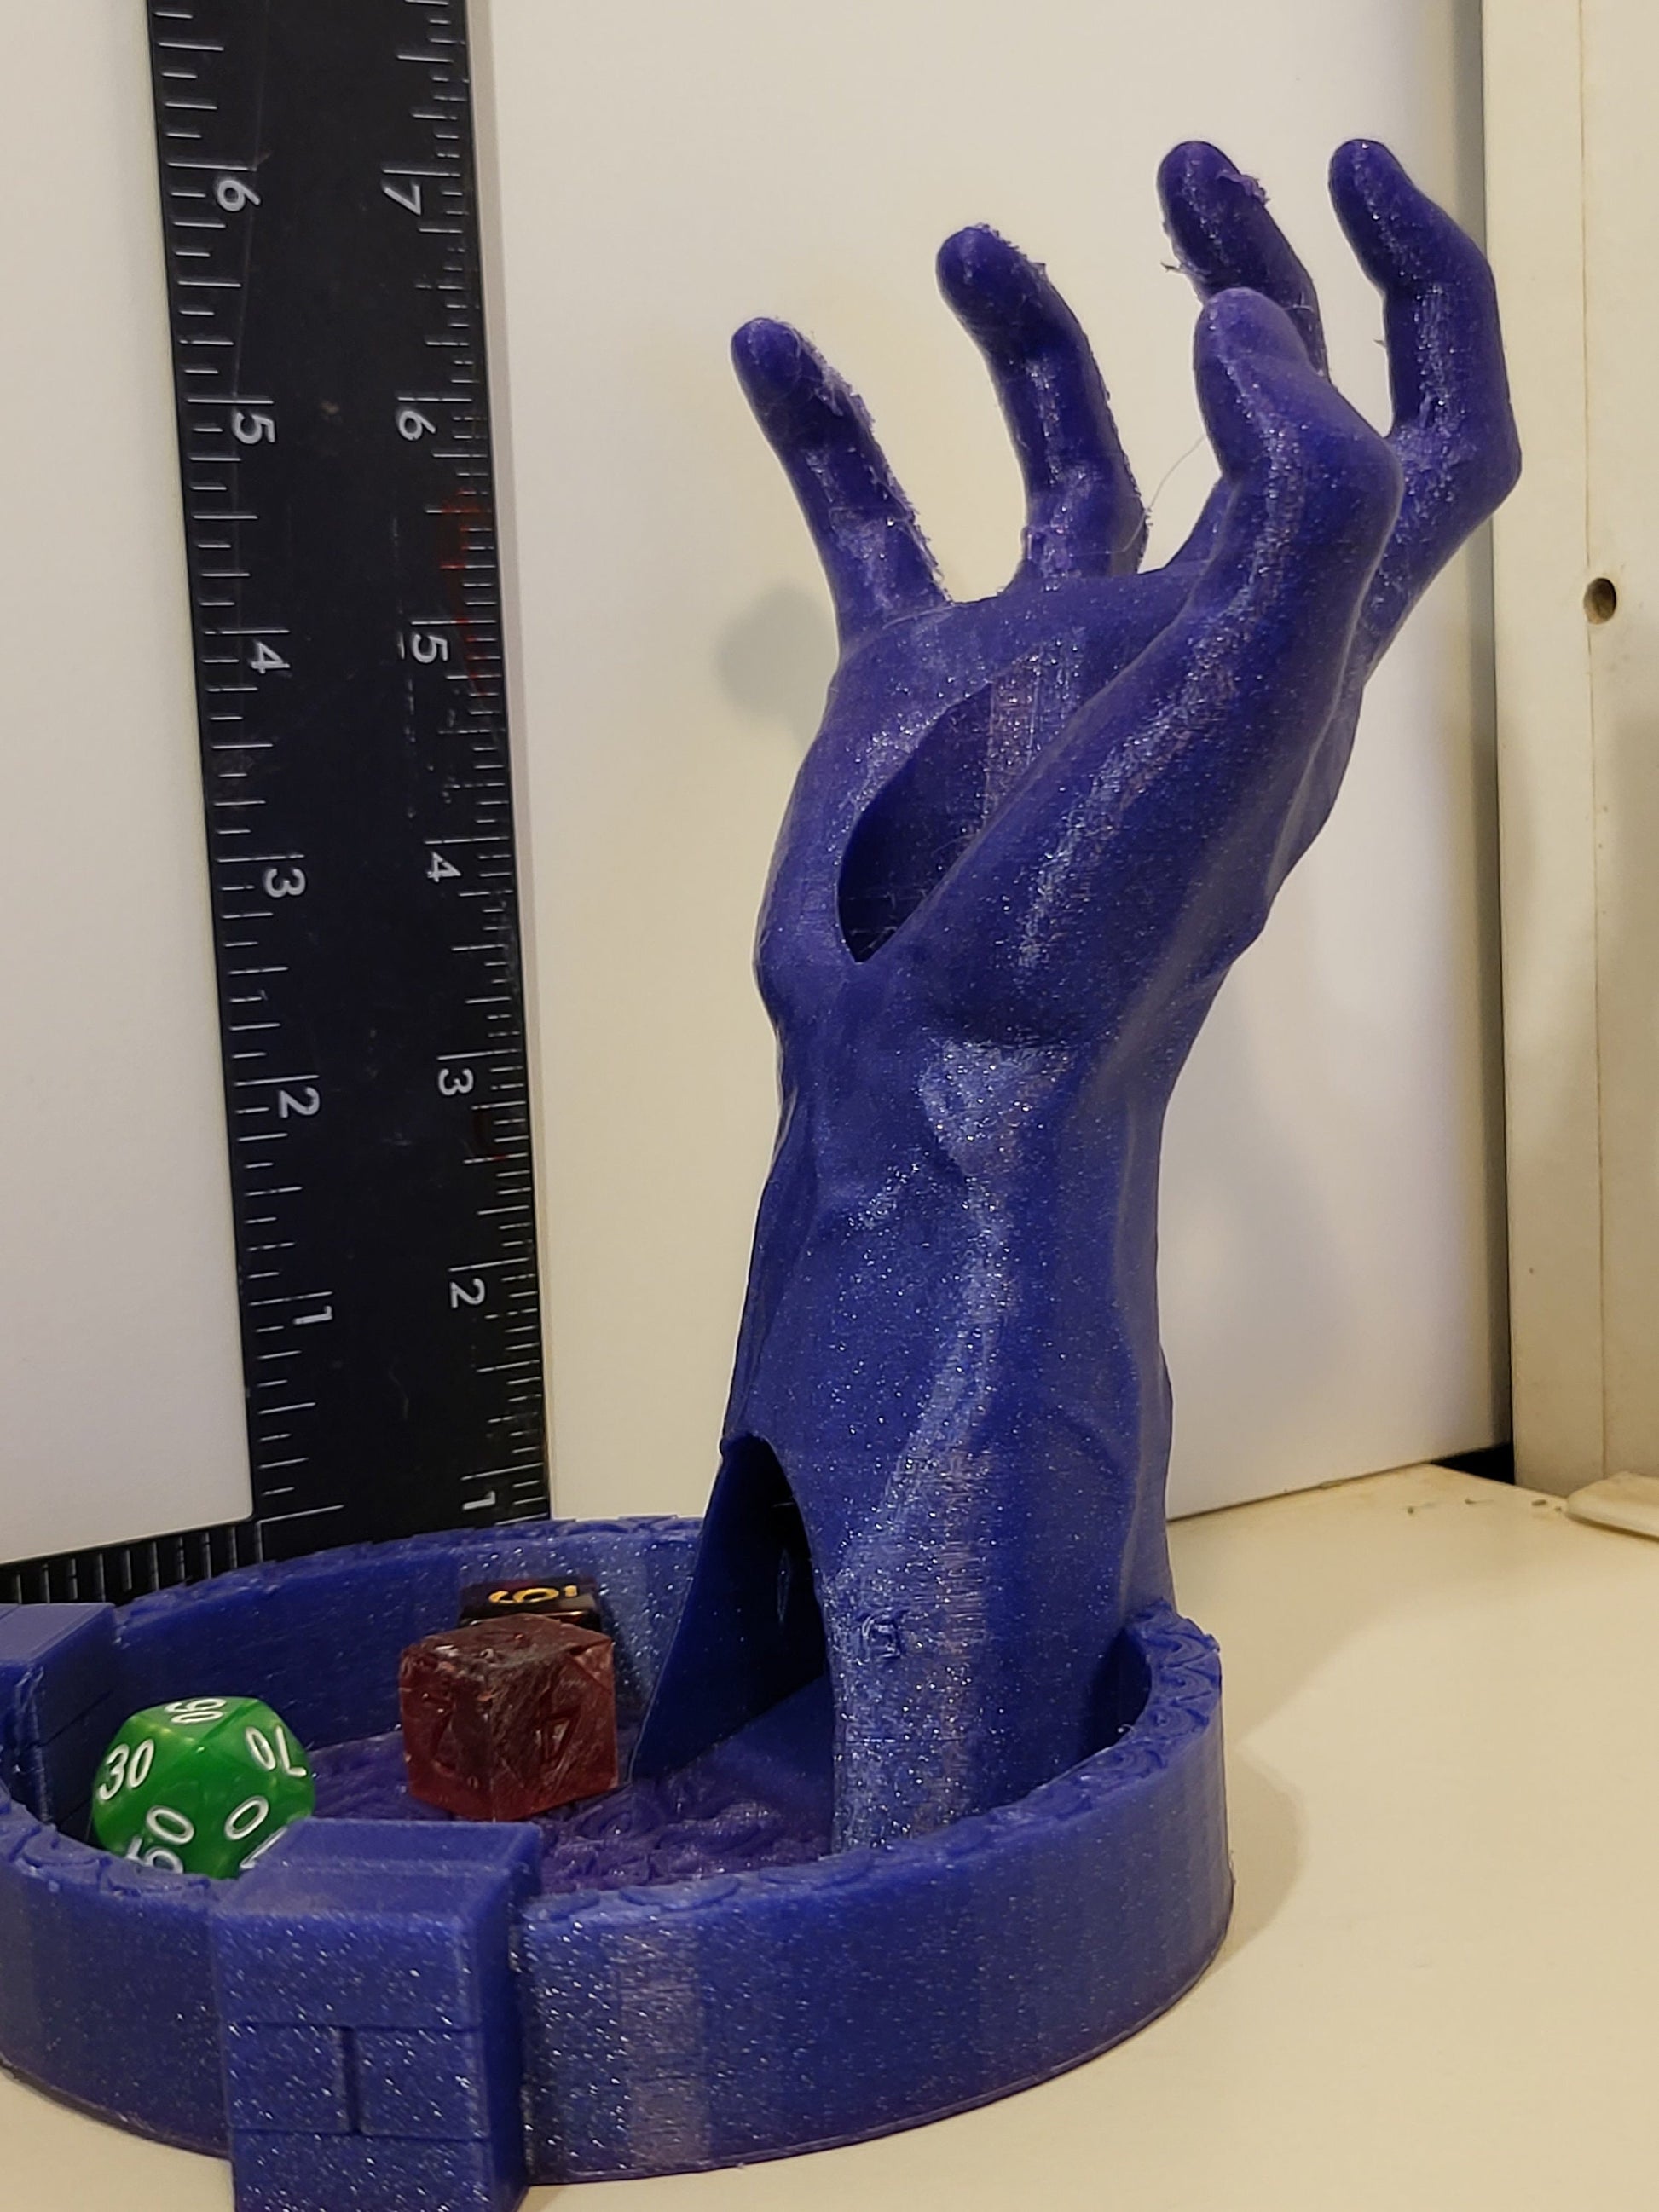 Mage Hand Dice Tower - RPG Dice Tower - Dungeons and Dragons Dice - Warhammer rolling tower